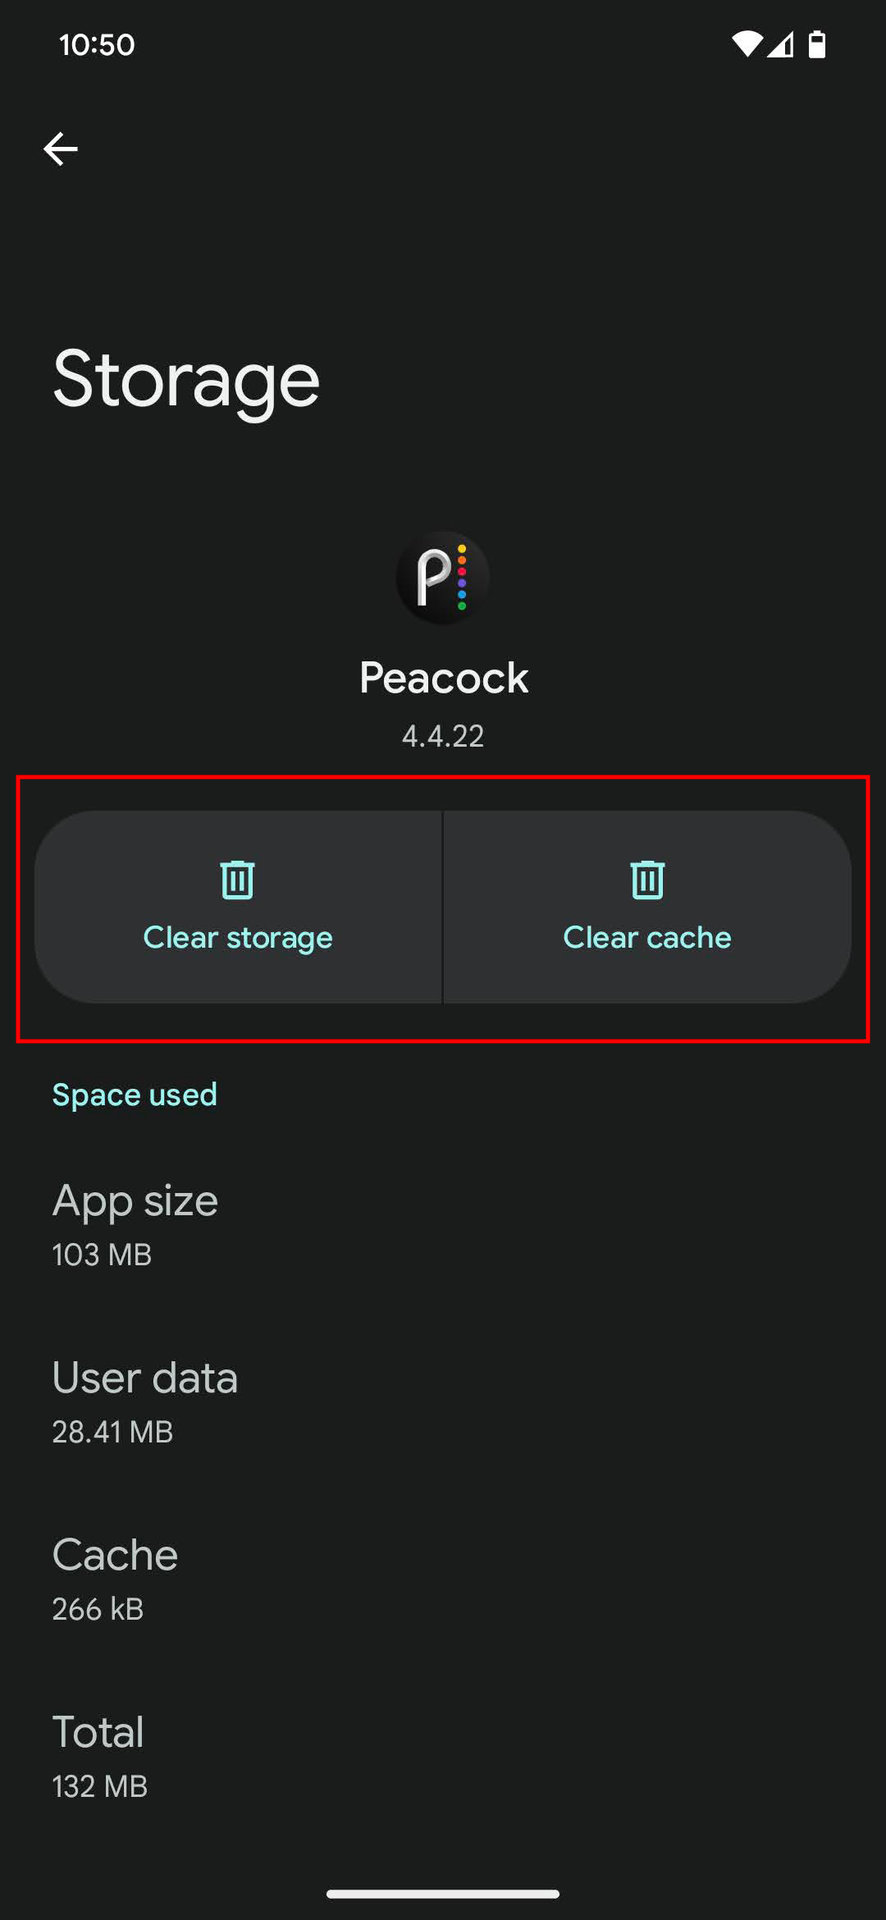 How to clear cache and storage for Peacock TV on Android 4